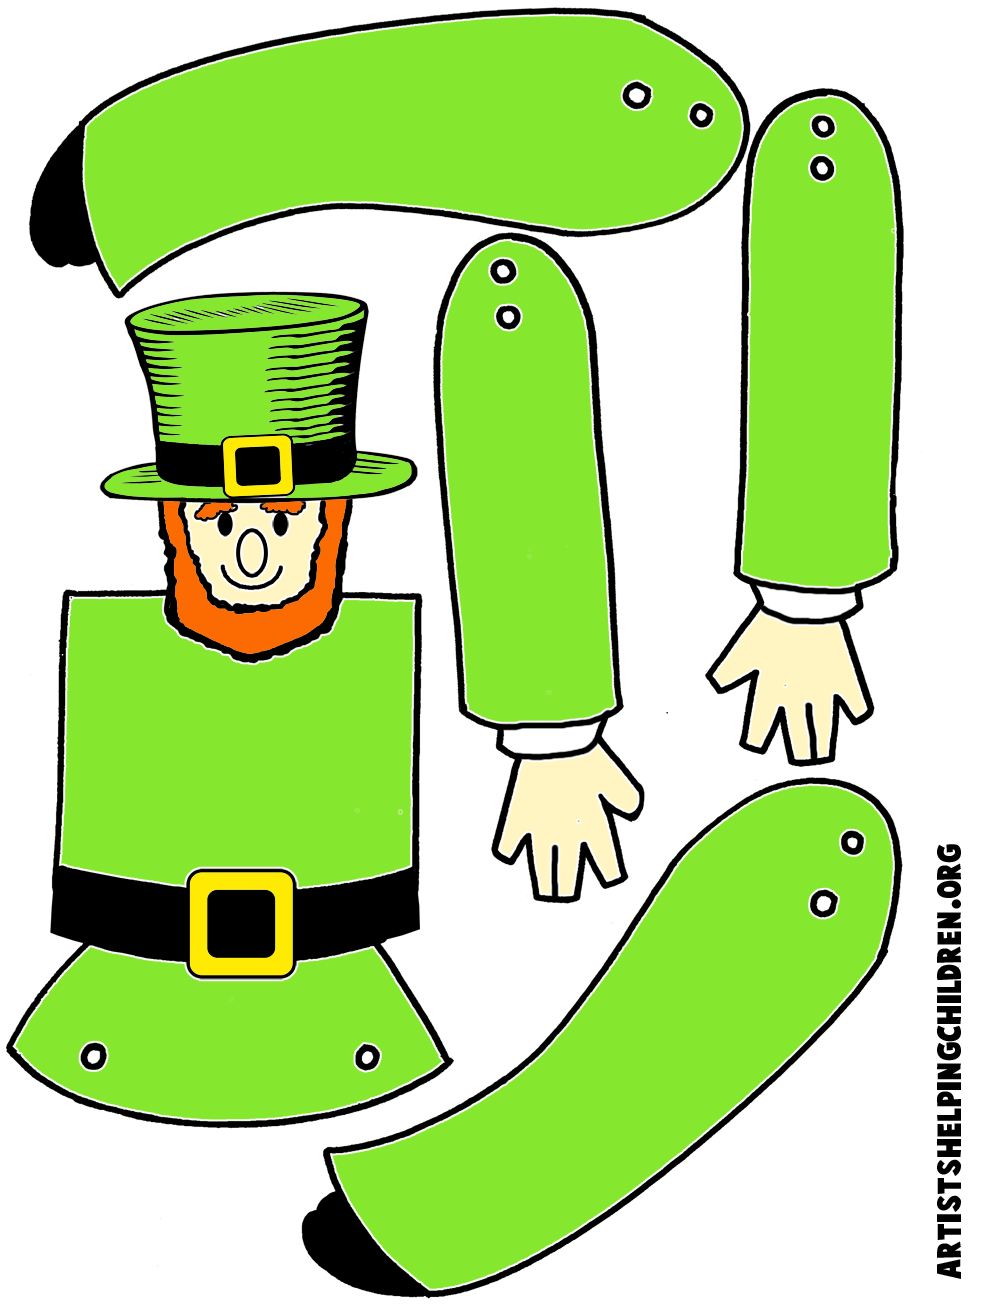 How to Make Jumping Jack Leprechauns for St. Patrick's Day - Kids